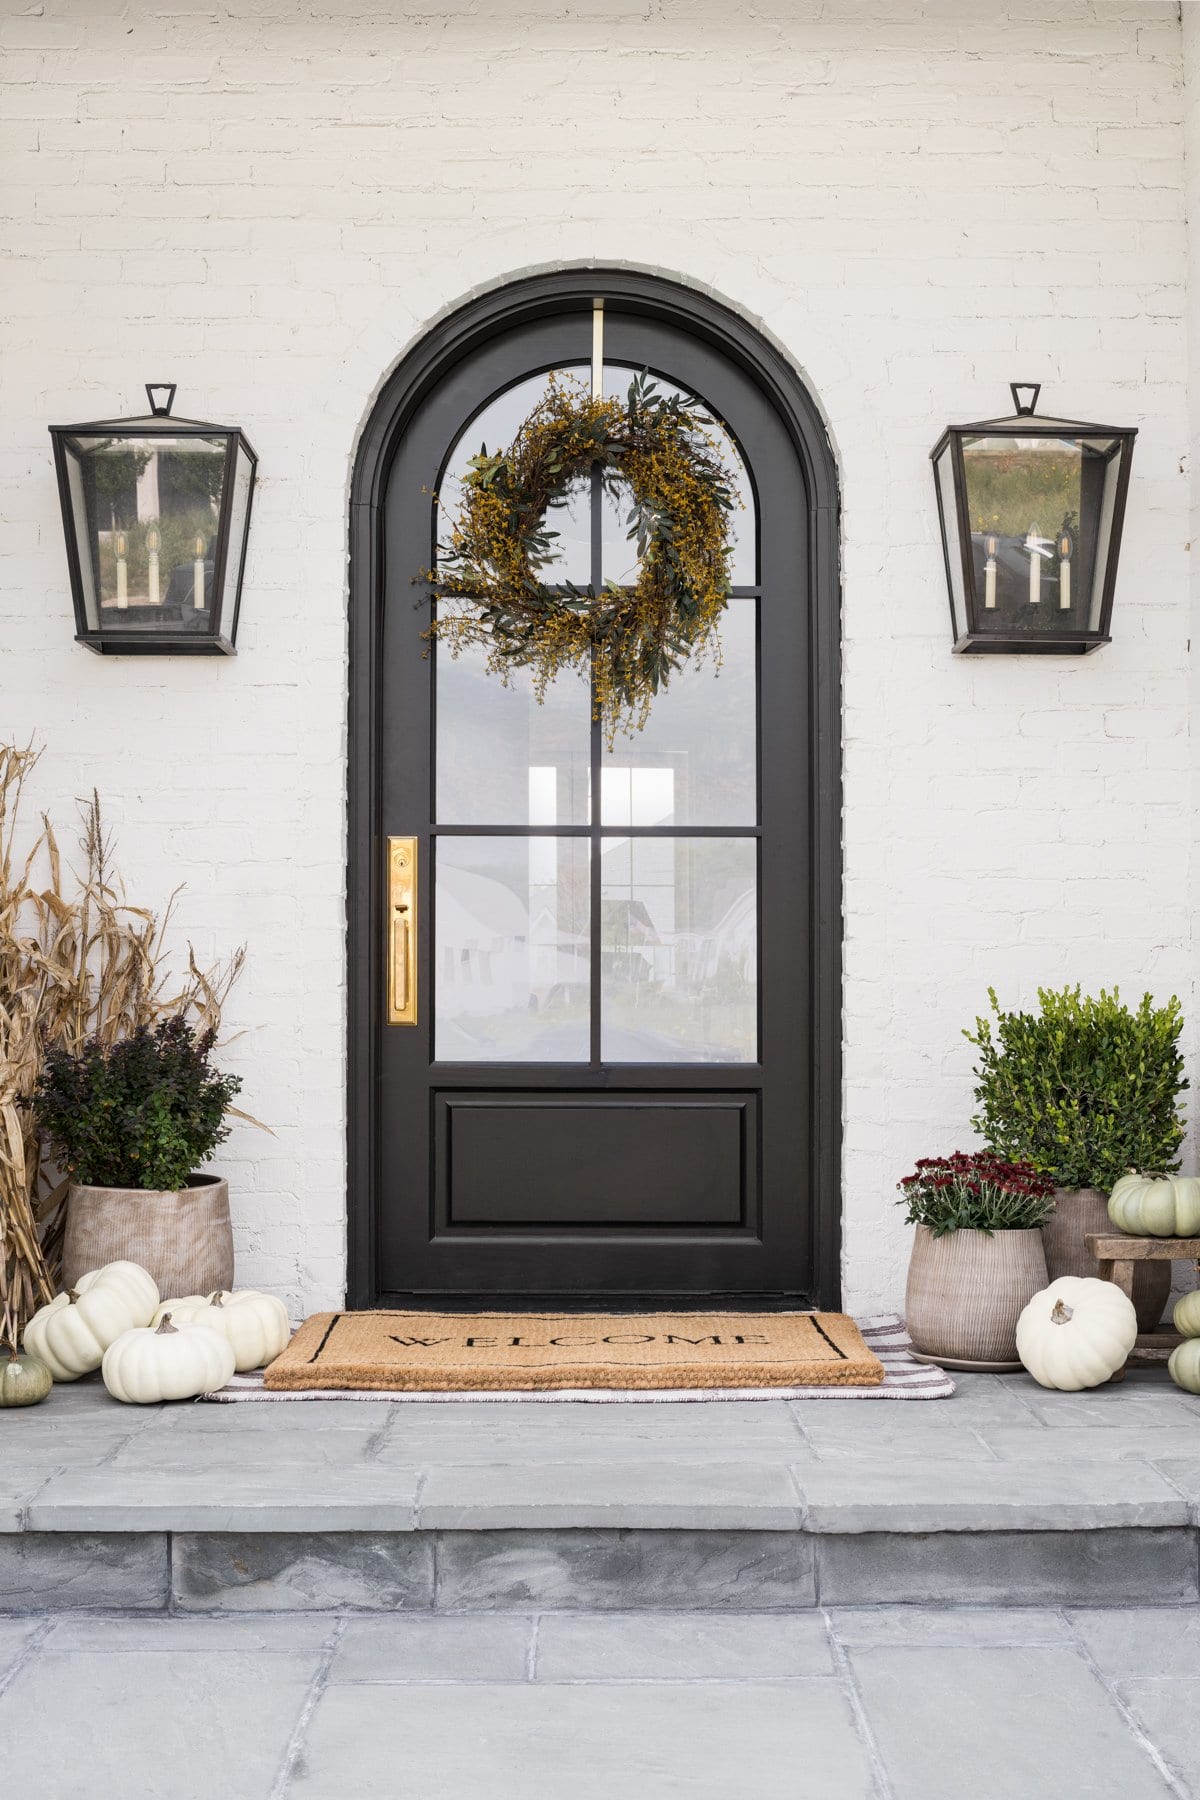 Beautiful Autumn Fall Wreaths + Where to Buy Them